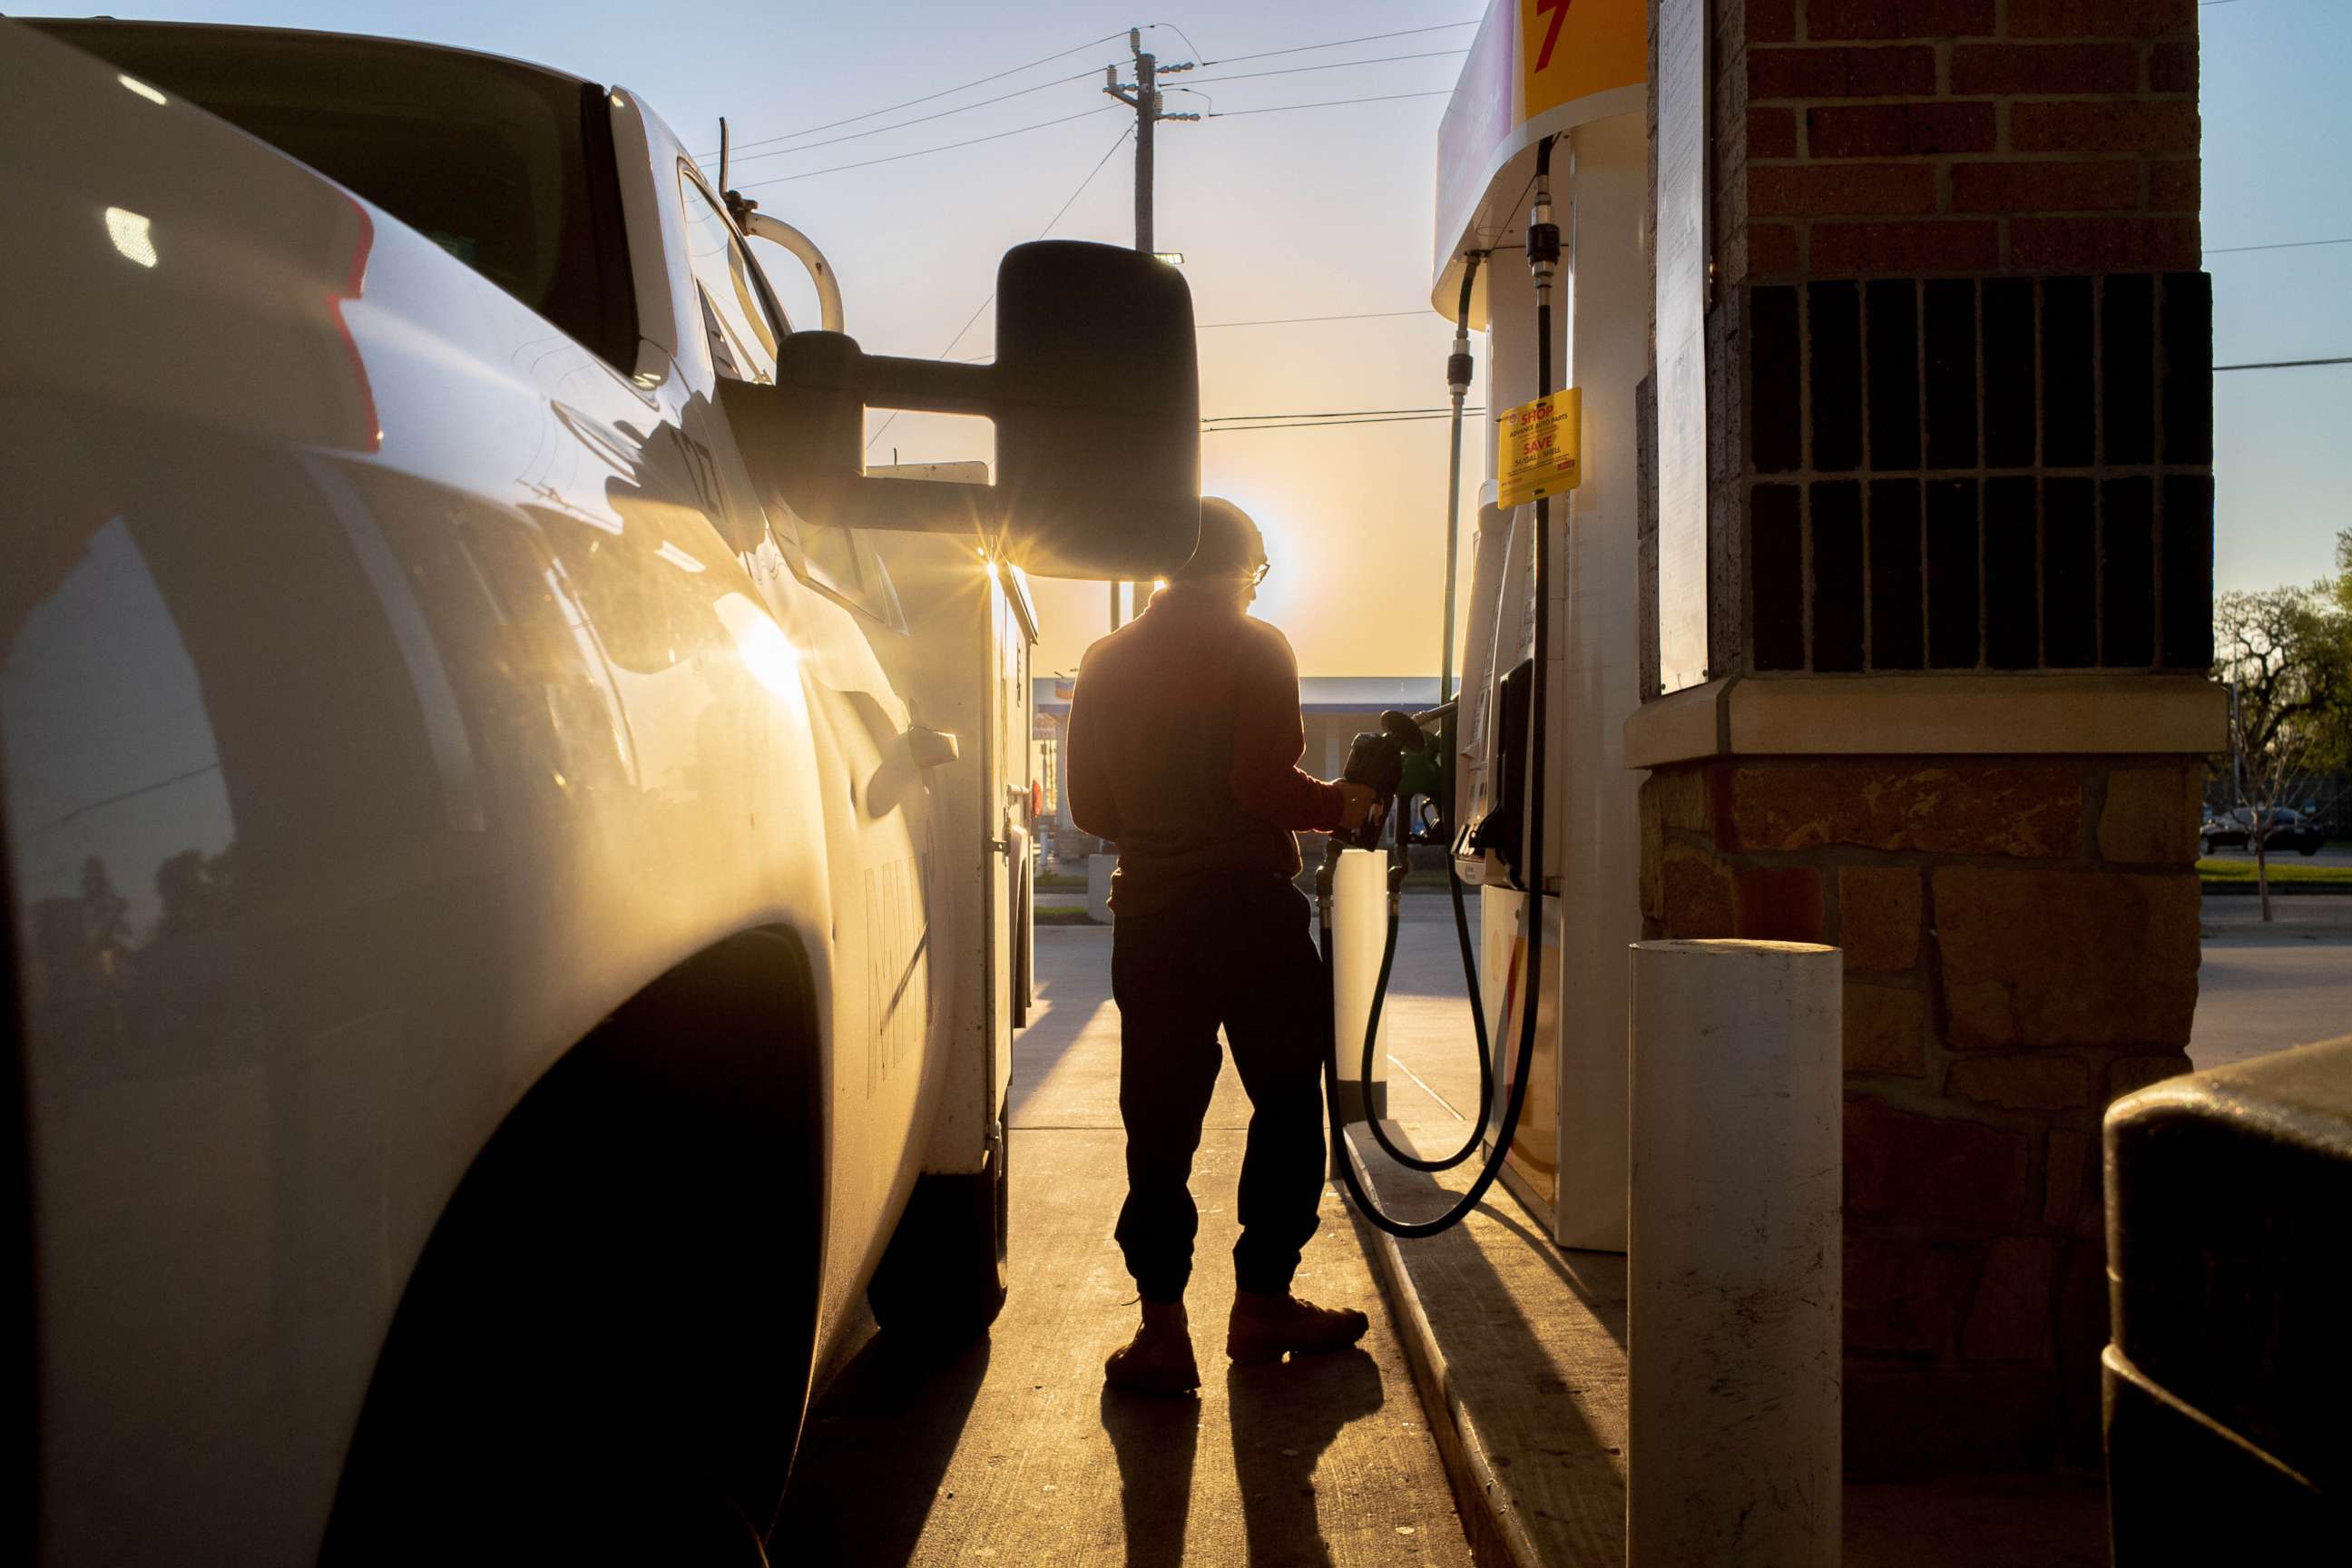 PHOTO: A person prepares to pump gas at a gas station in Houston, April 01, 2022.